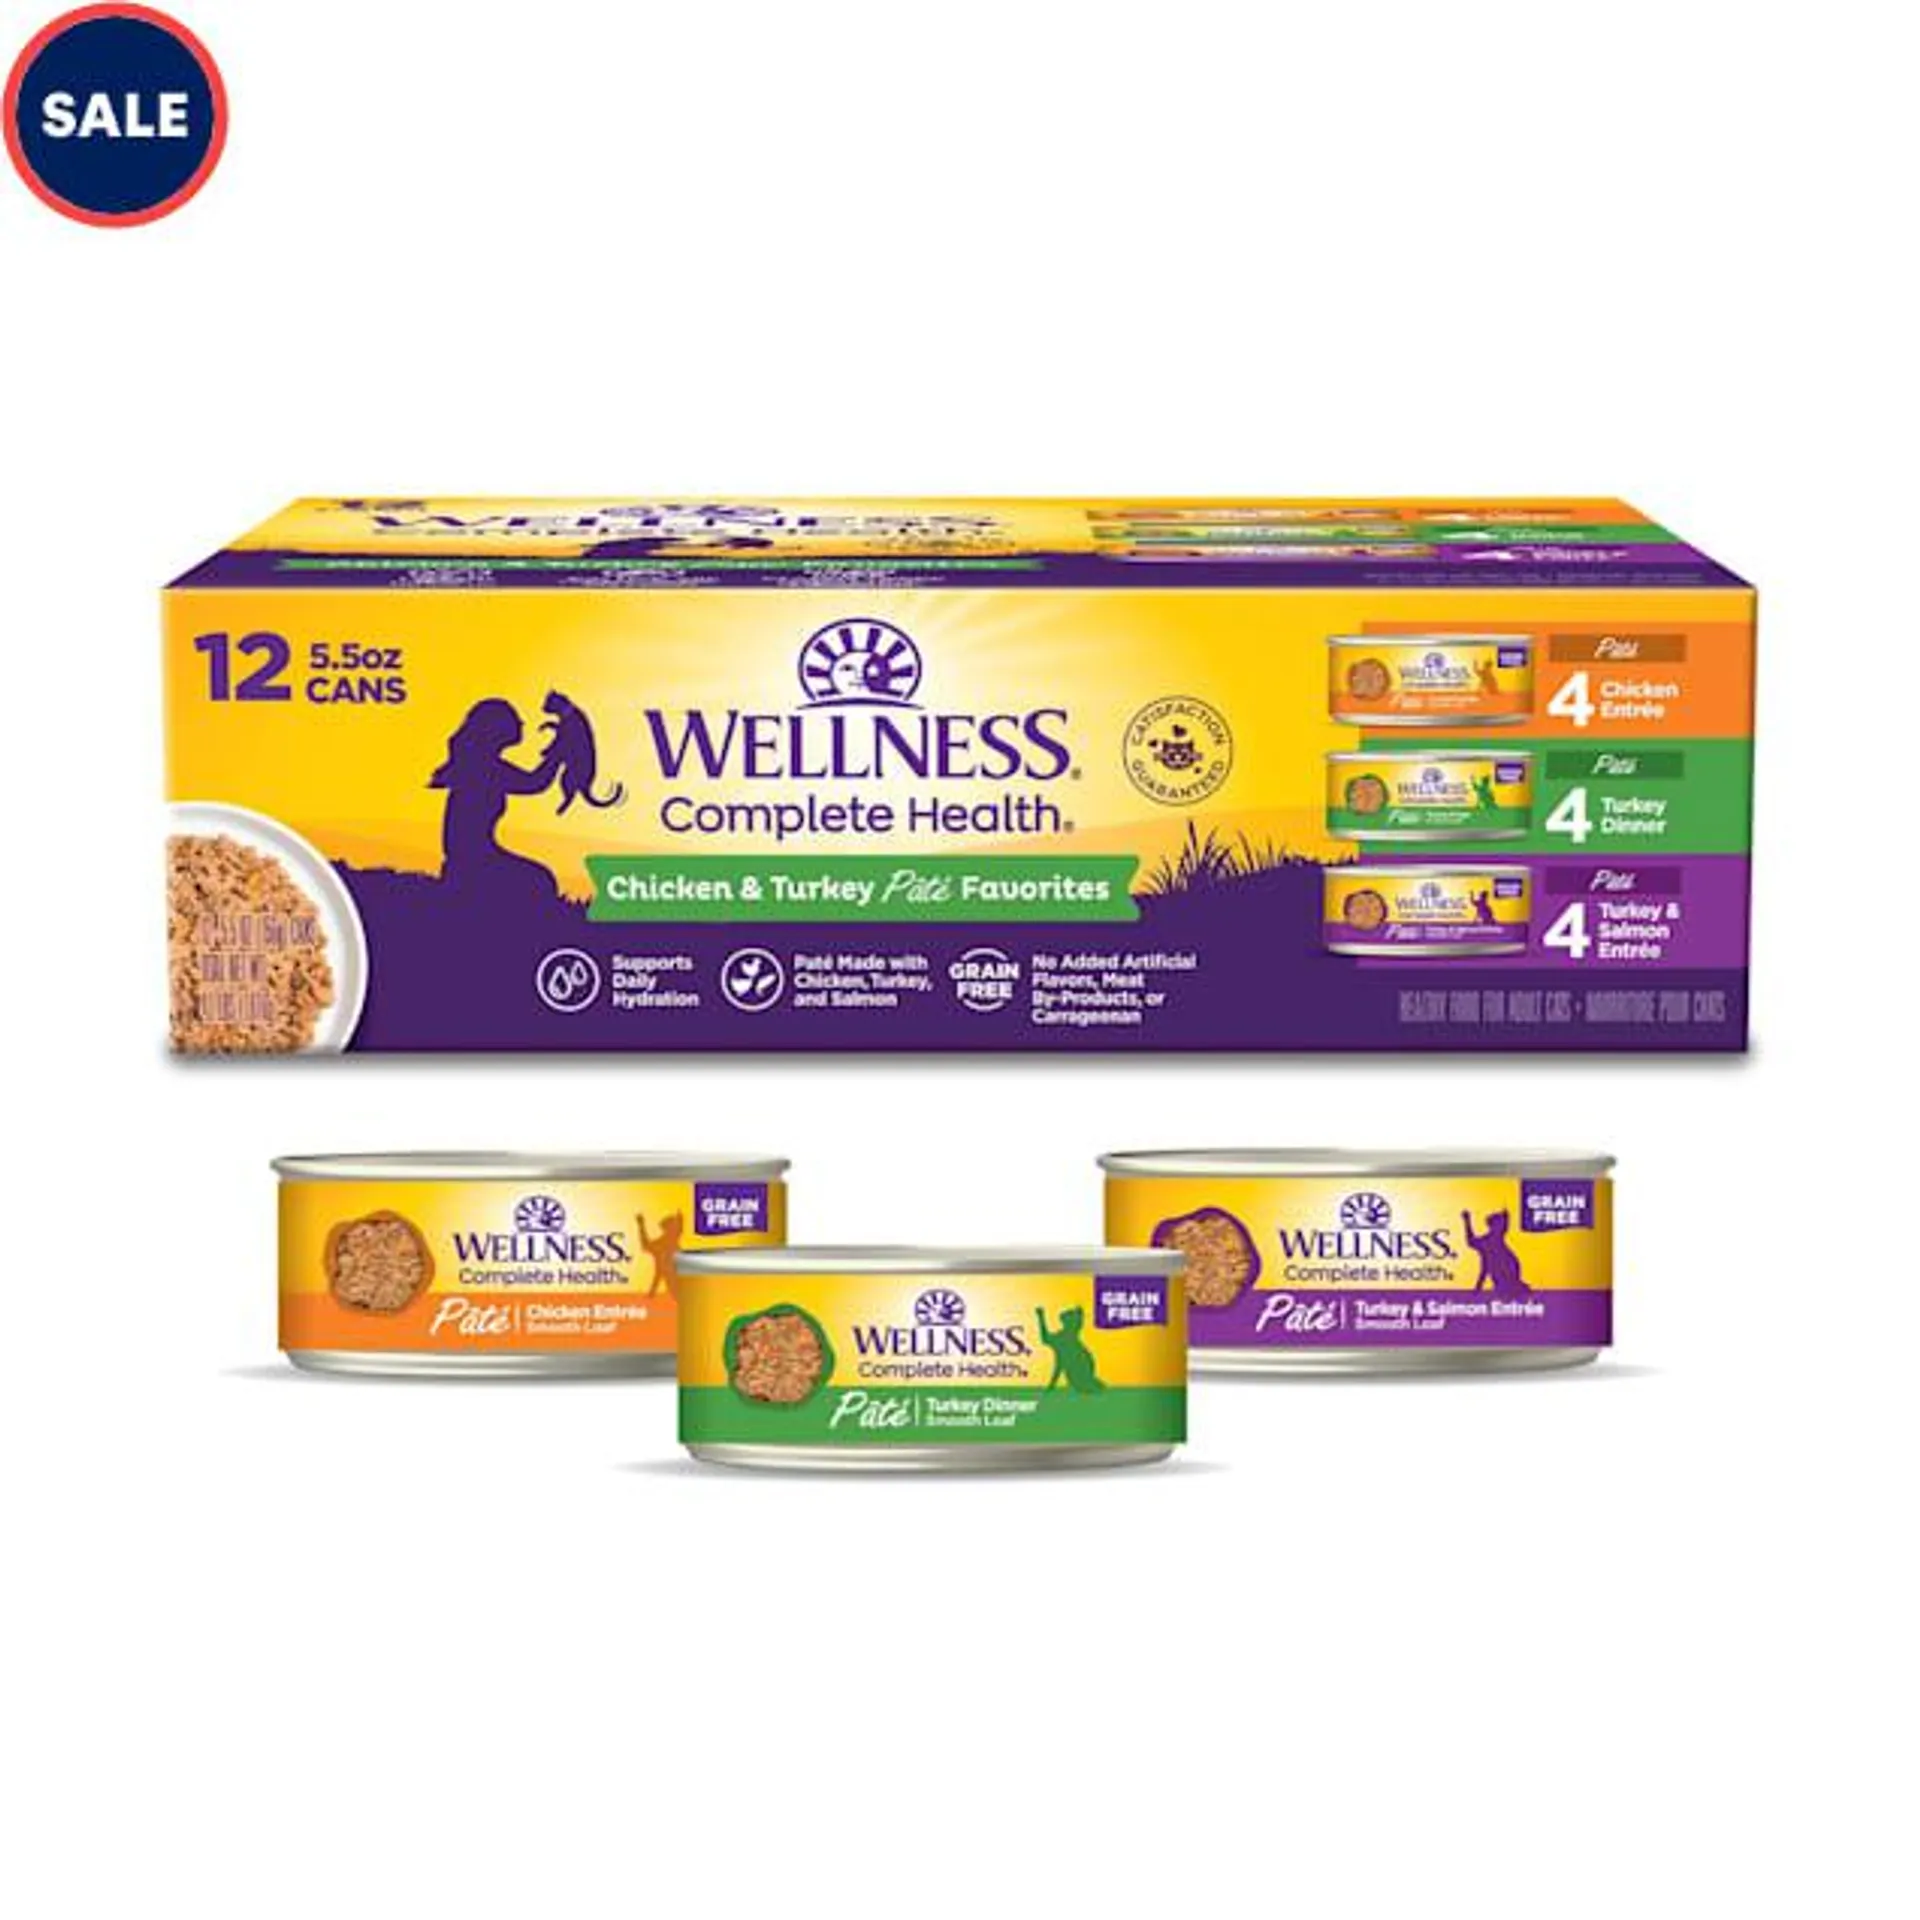 Wellness Complete Health Chicken & Turkey Pate Favorites Cat Food Variety Pack, 5.5 oz., Count of 12